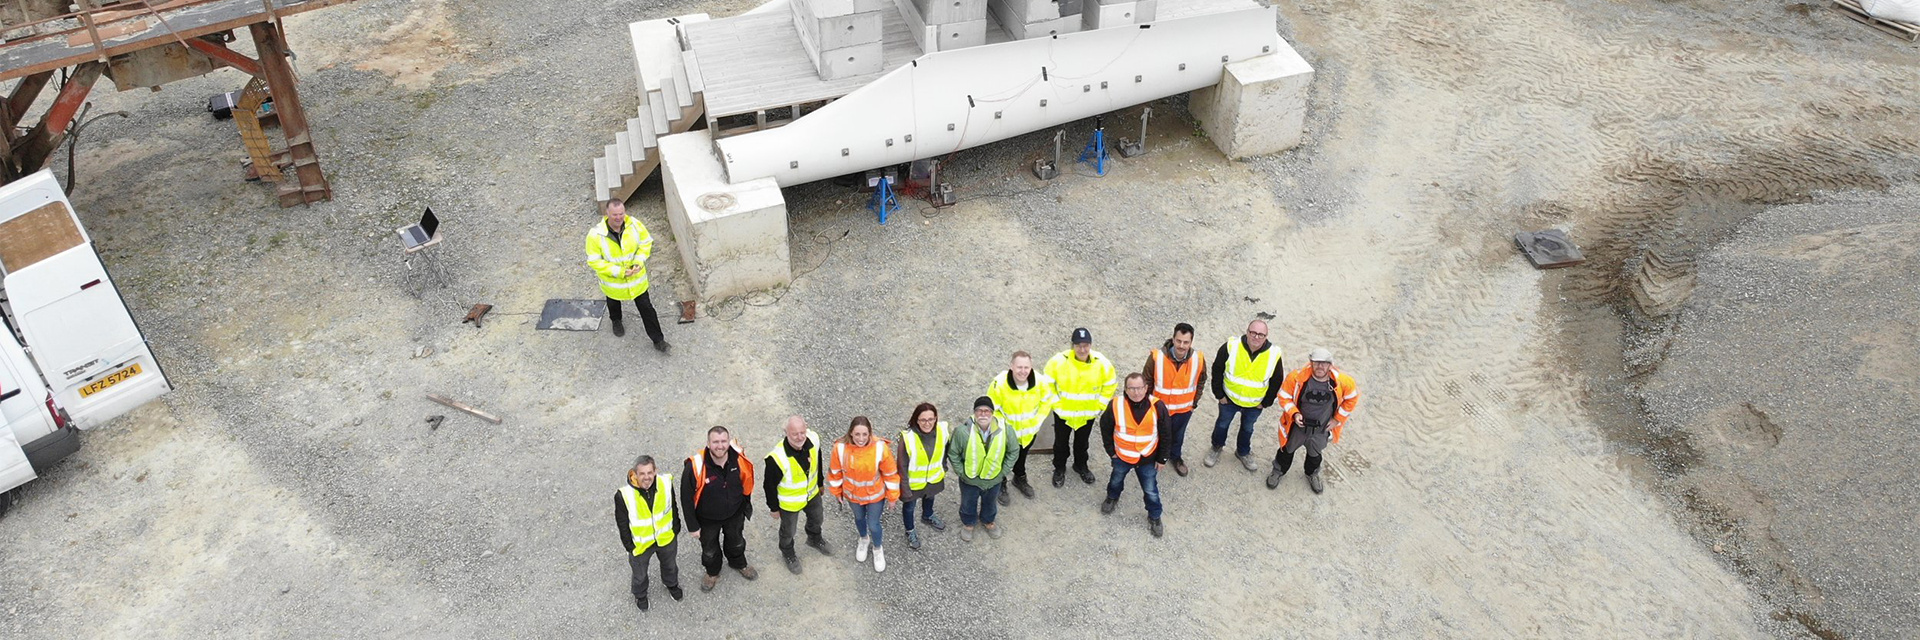 Aerial shot showing members of the Re-Wind Network stand in front of a pedestrian bridge made using decommissioned wind turbine blades